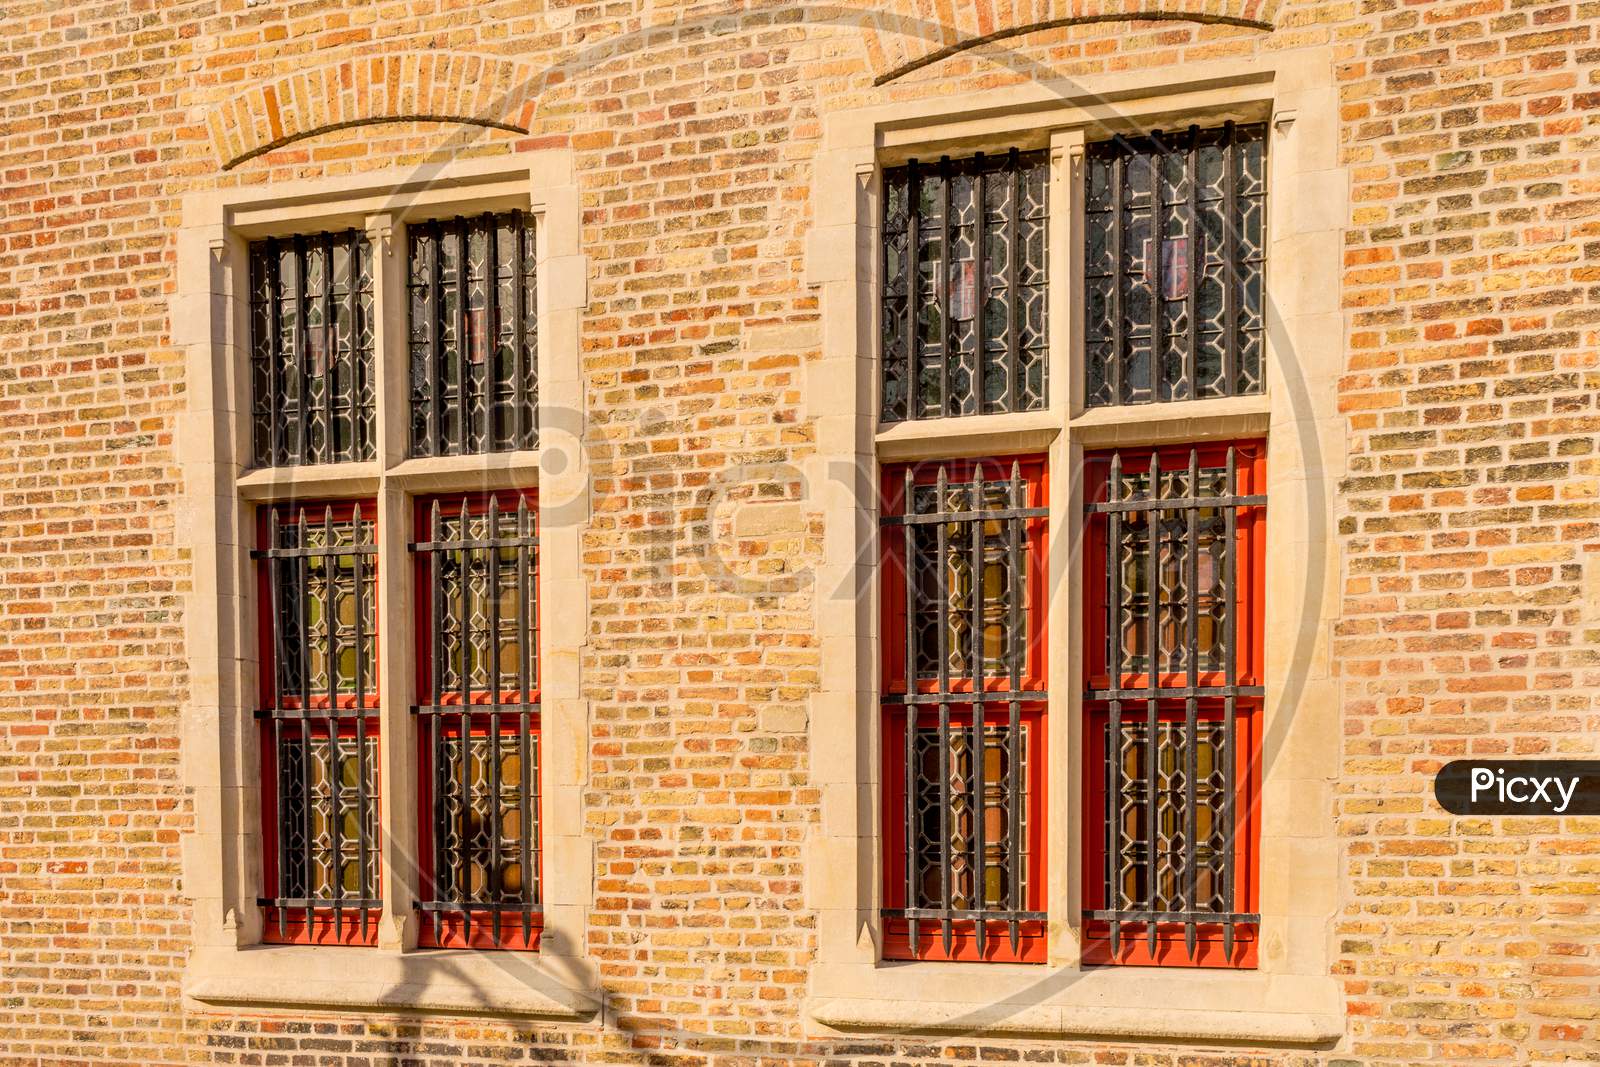 Belgium, Bruges, A Close Up Of A Brick Building With Grilled Windows